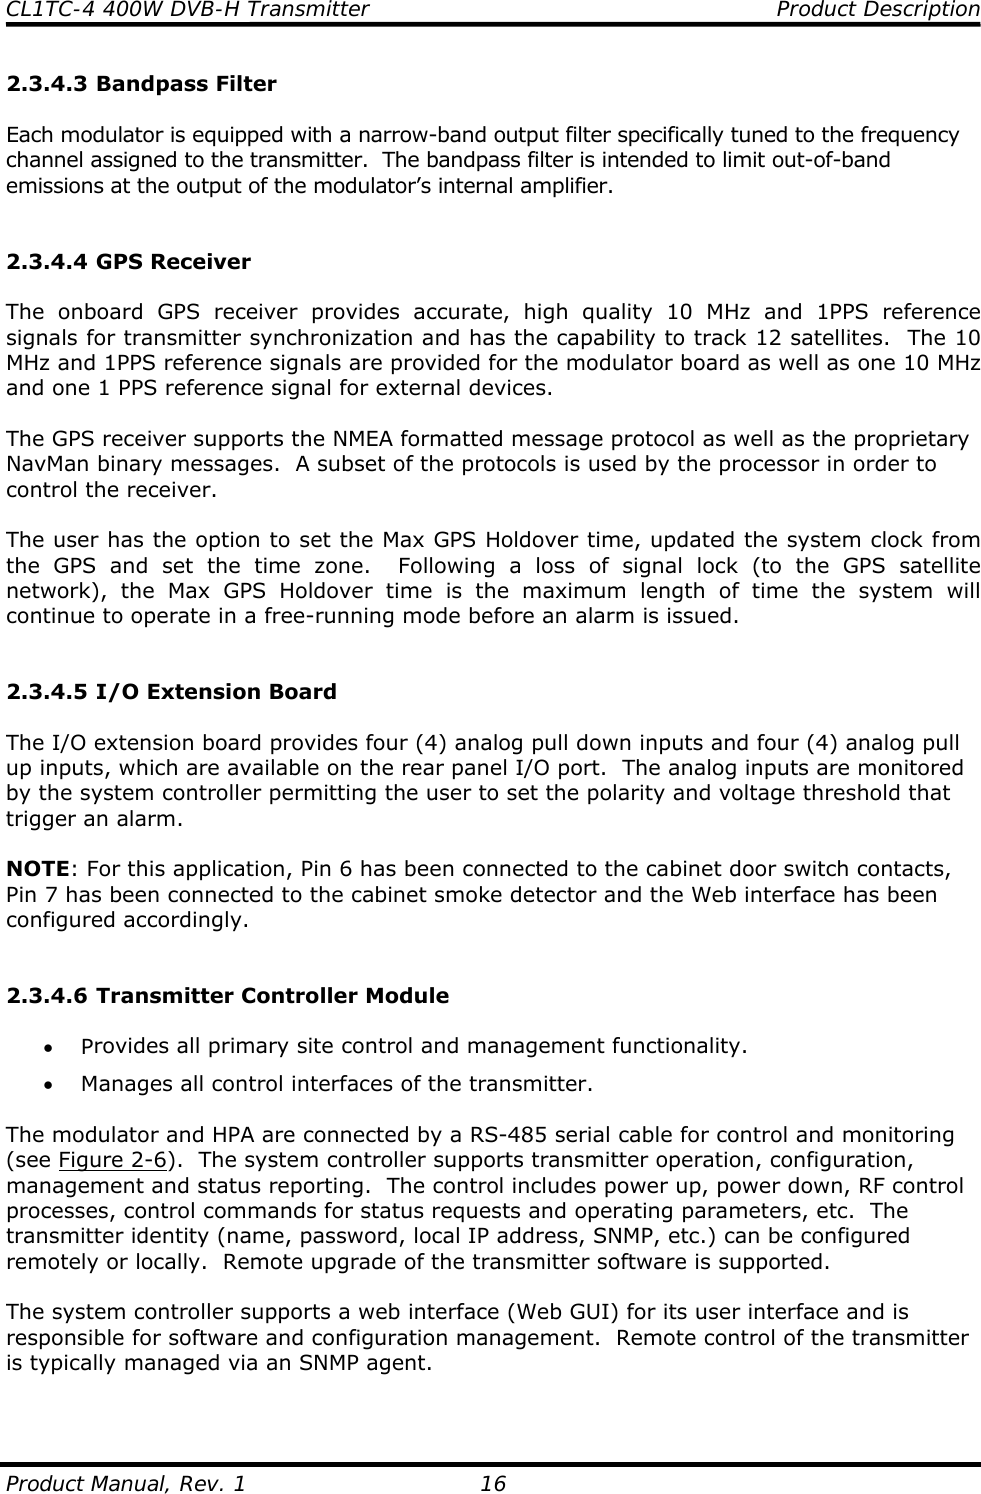 CL1TC-4 400W DVB-H Transmitter    Product Description  Product Manual, Rev. 1  16 2.3.4.3 Bandpass Filter  Each modulator is equipped with a narrow-band output filter specifically tuned to the frequency channel assigned to the transmitter.  The bandpass filter is intended to limit out-of-band emissions at the output of the modulator’s internal amplifier.   2.3.4.4 GPS Receiver  The onboard GPS receiver provides accurate, high quality 10 MHz and 1PPS reference signals for transmitter synchronization and has the capability to track 12 satellites.  The 10 MHz and 1PPS reference signals are provided for the modulator board as well as one 10 MHz and one 1 PPS reference signal for external devices.  The GPS receiver supports the NMEA formatted message protocol as well as the proprietary NavMan binary messages.  A subset of the protocols is used by the processor in order to control the receiver.  The user has the option to set the Max GPS Holdover time, updated the system clock from the GPS and set the time zone.  Following a loss of signal lock (to the GPS satellite network), the Max GPS Holdover time is the maximum length of time the system will continue to operate in a free-running mode before an alarm is issued.   2.3.4.5 I/O Extension Board  The I/O extension board provides four (4) analog pull down inputs and four (4) analog pull up inputs, which are available on the rear panel I/O port.  The analog inputs are monitored by the system controller permitting the user to set the polarity and voltage threshold that trigger an alarm.  NOTE: For this application, Pin 6 has been connected to the cabinet door switch contacts, Pin 7 has been connected to the cabinet smoke detector and the Web interface has been configured accordingly.   2.3.4.6 Transmitter Controller Module  • Provides all primary site control and management functionality. • Manages all control interfaces of the transmitter.  The modulator and HPA are connected by a RS-485 serial cable for control and monitoring (see Figure 2-6).  The system controller supports transmitter operation, configuration, management and status reporting.  The control includes power up, power down, RF control processes, control commands for status requests and operating parameters, etc.  The transmitter identity (name, password, local IP address, SNMP, etc.) can be configured remotely or locally.  Remote upgrade of the transmitter software is supported.  The system controller supports a web interface (Web GUI) for its user interface and is responsible for software and configuration management.  Remote control of the transmitter is typically managed via an SNMP agent.   